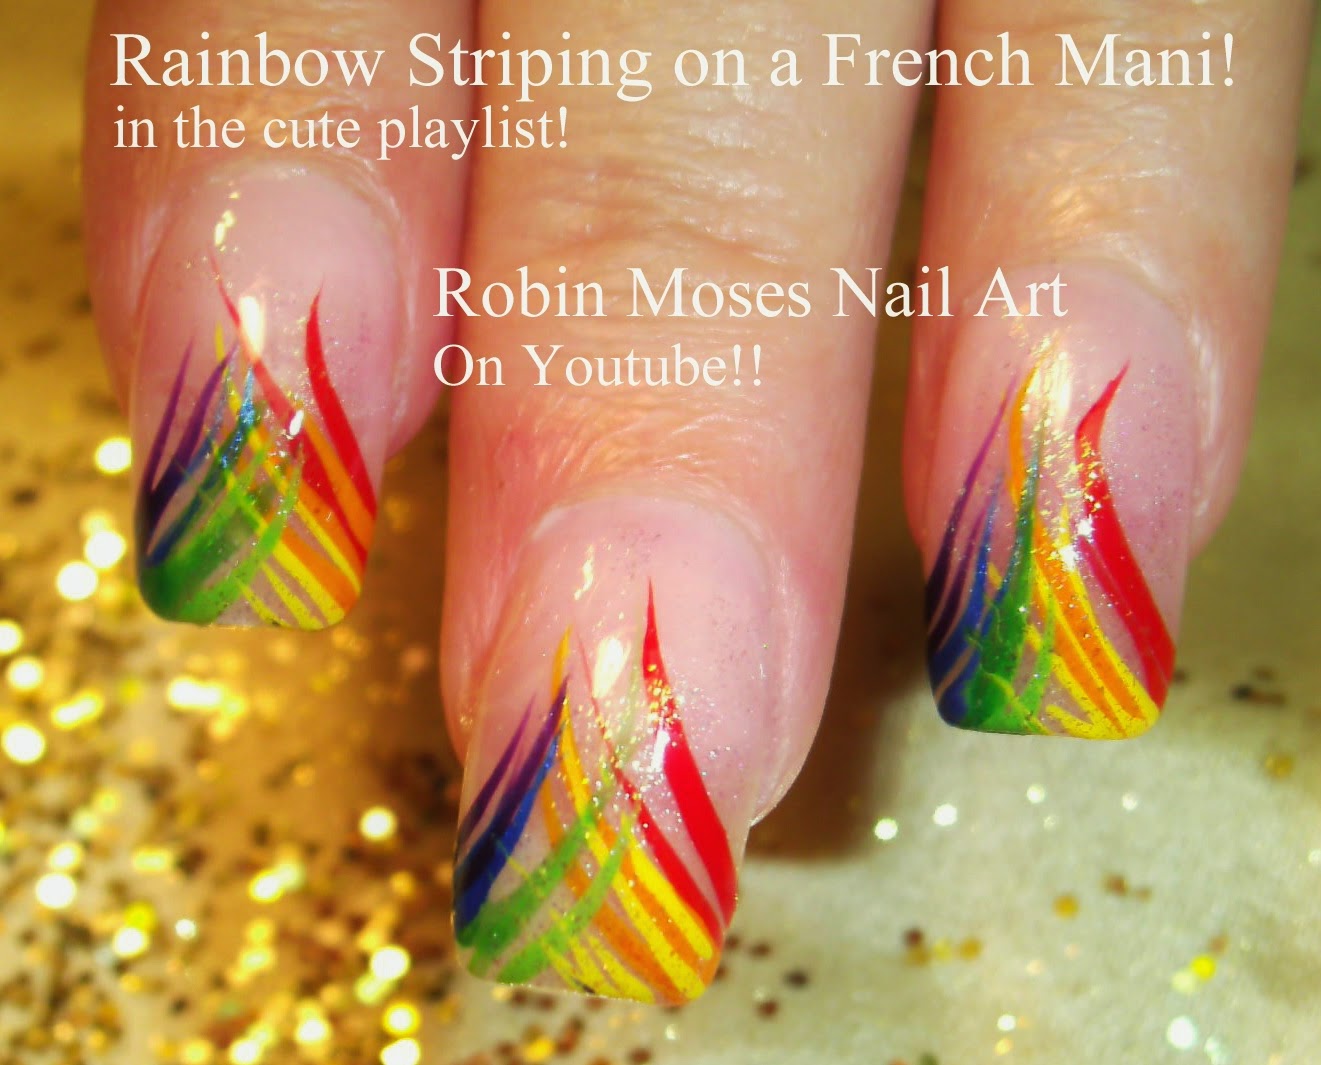 4. "Glitter Gradient Nails: A Simple and Chic Nail Art Idea" - wide 5